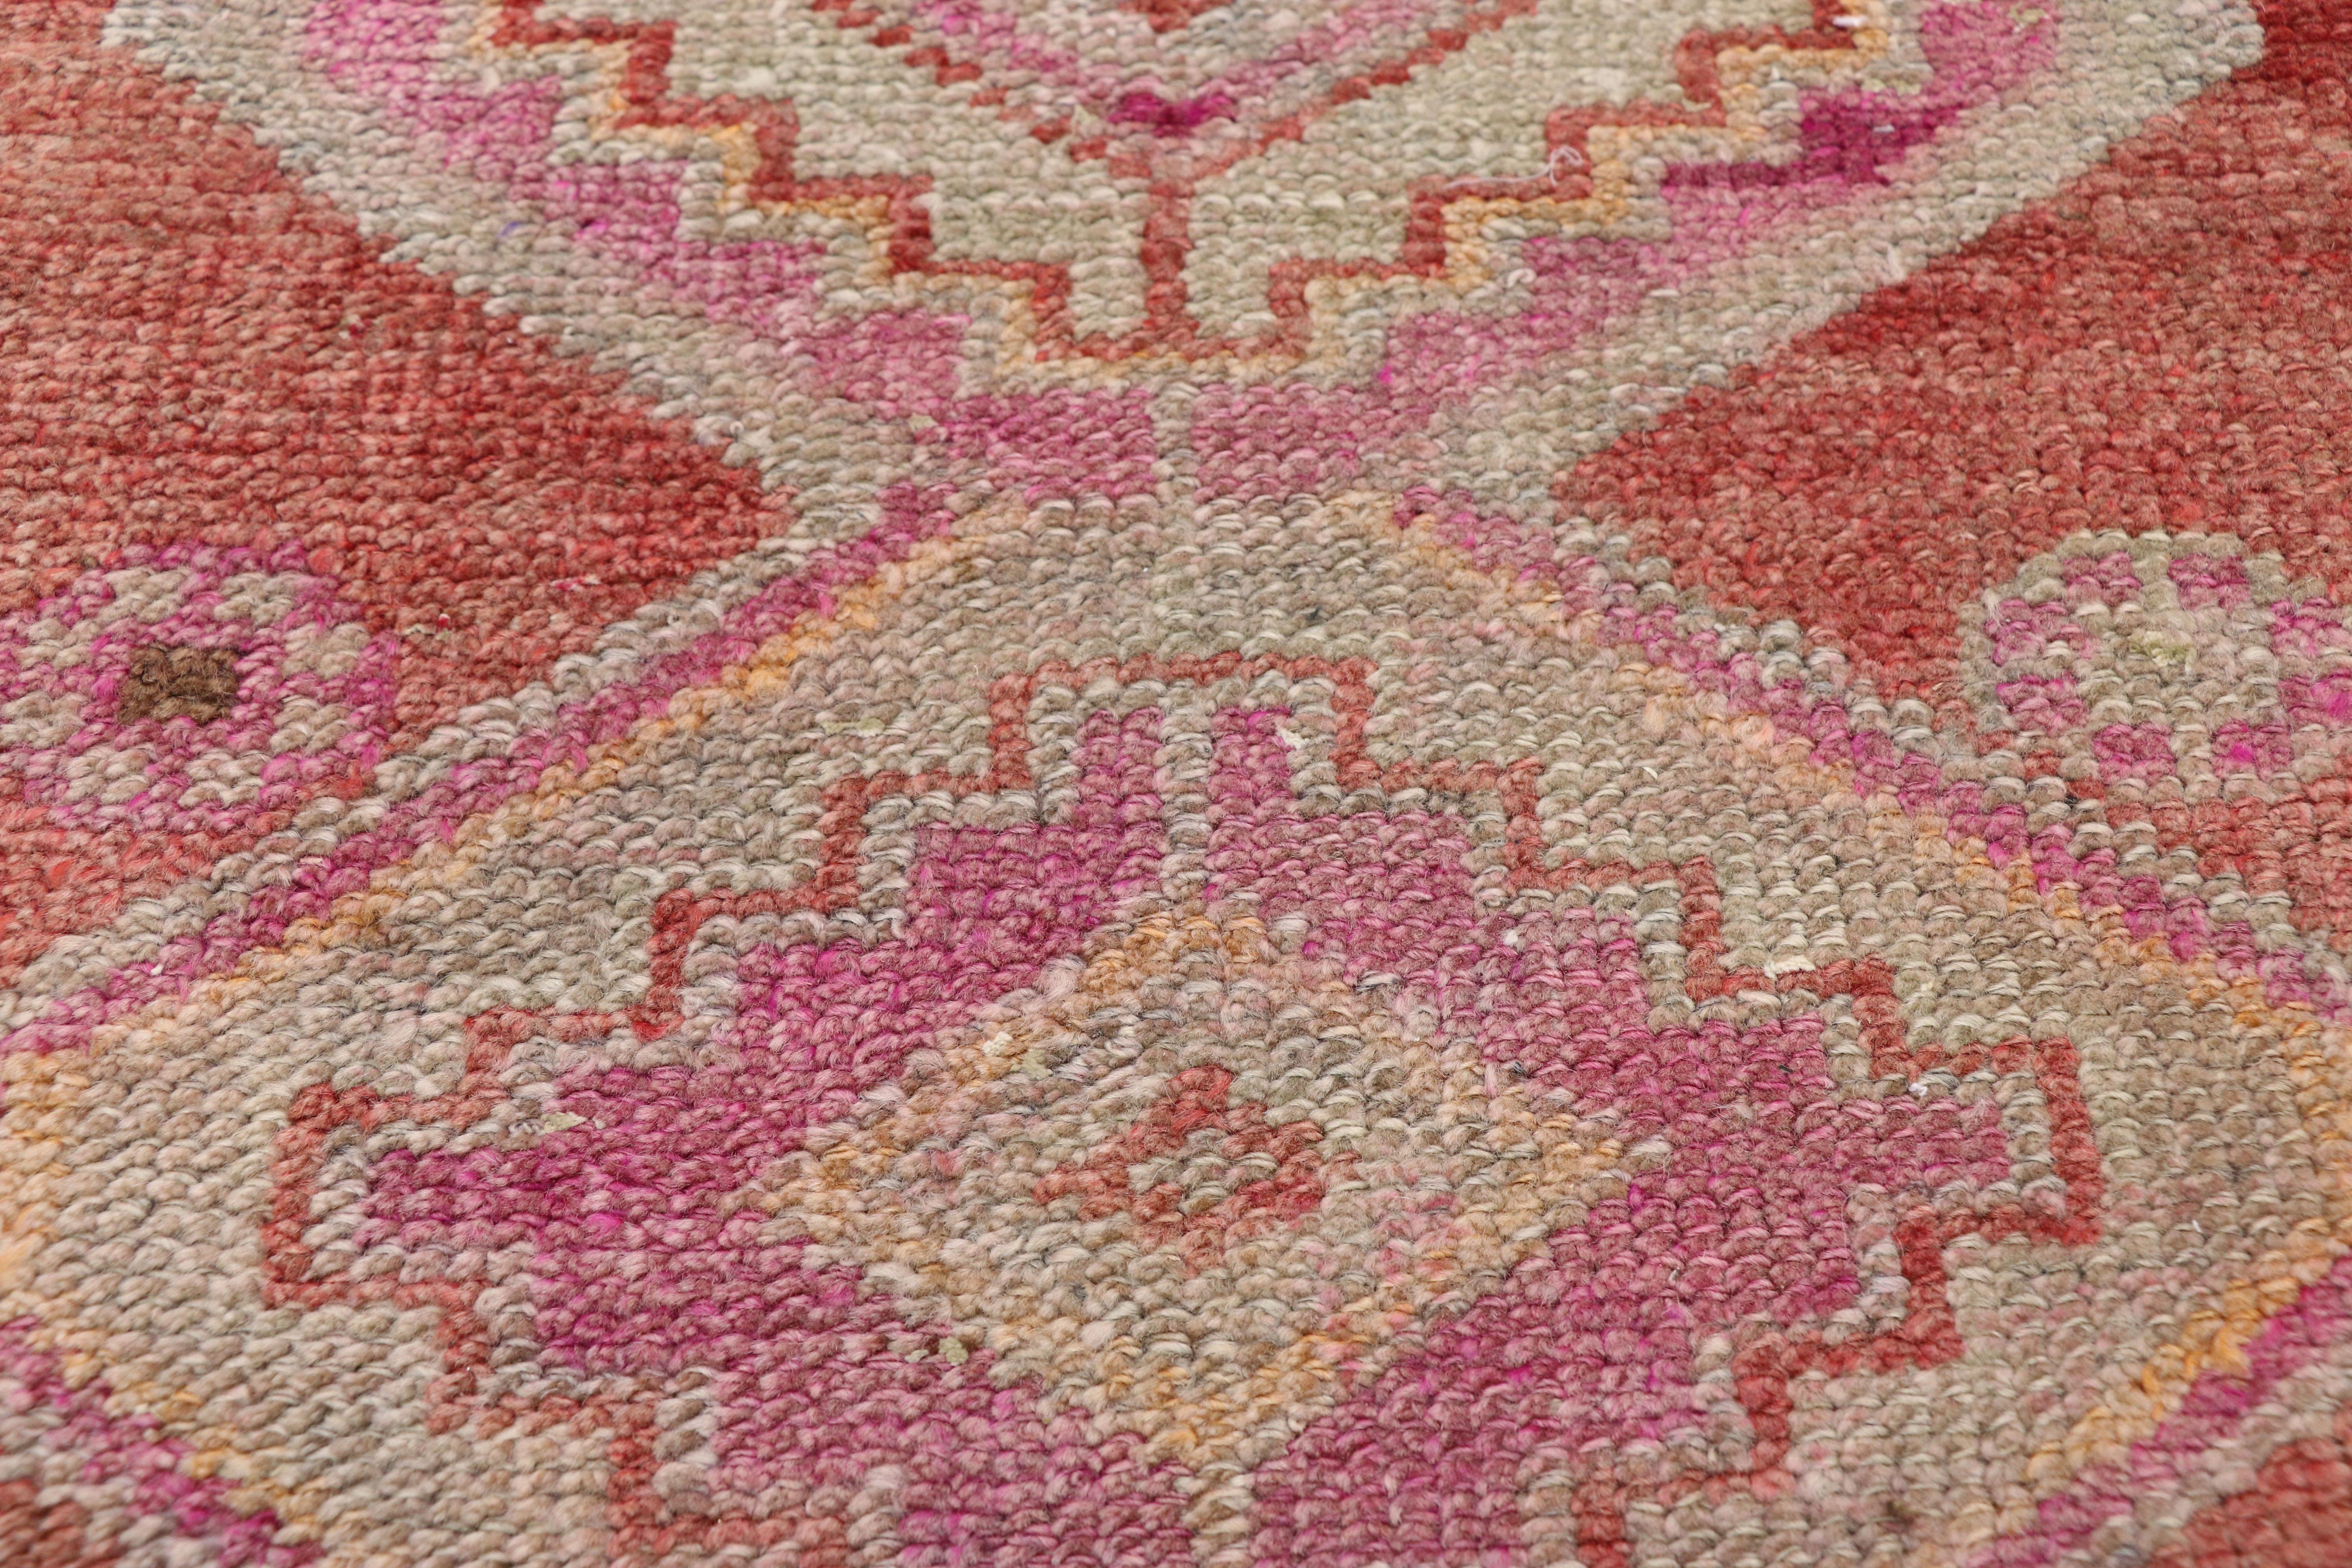 Vintage Red Turkish Oushak Rug Carpet Runner In Good Condition For Sale In Dallas, TX